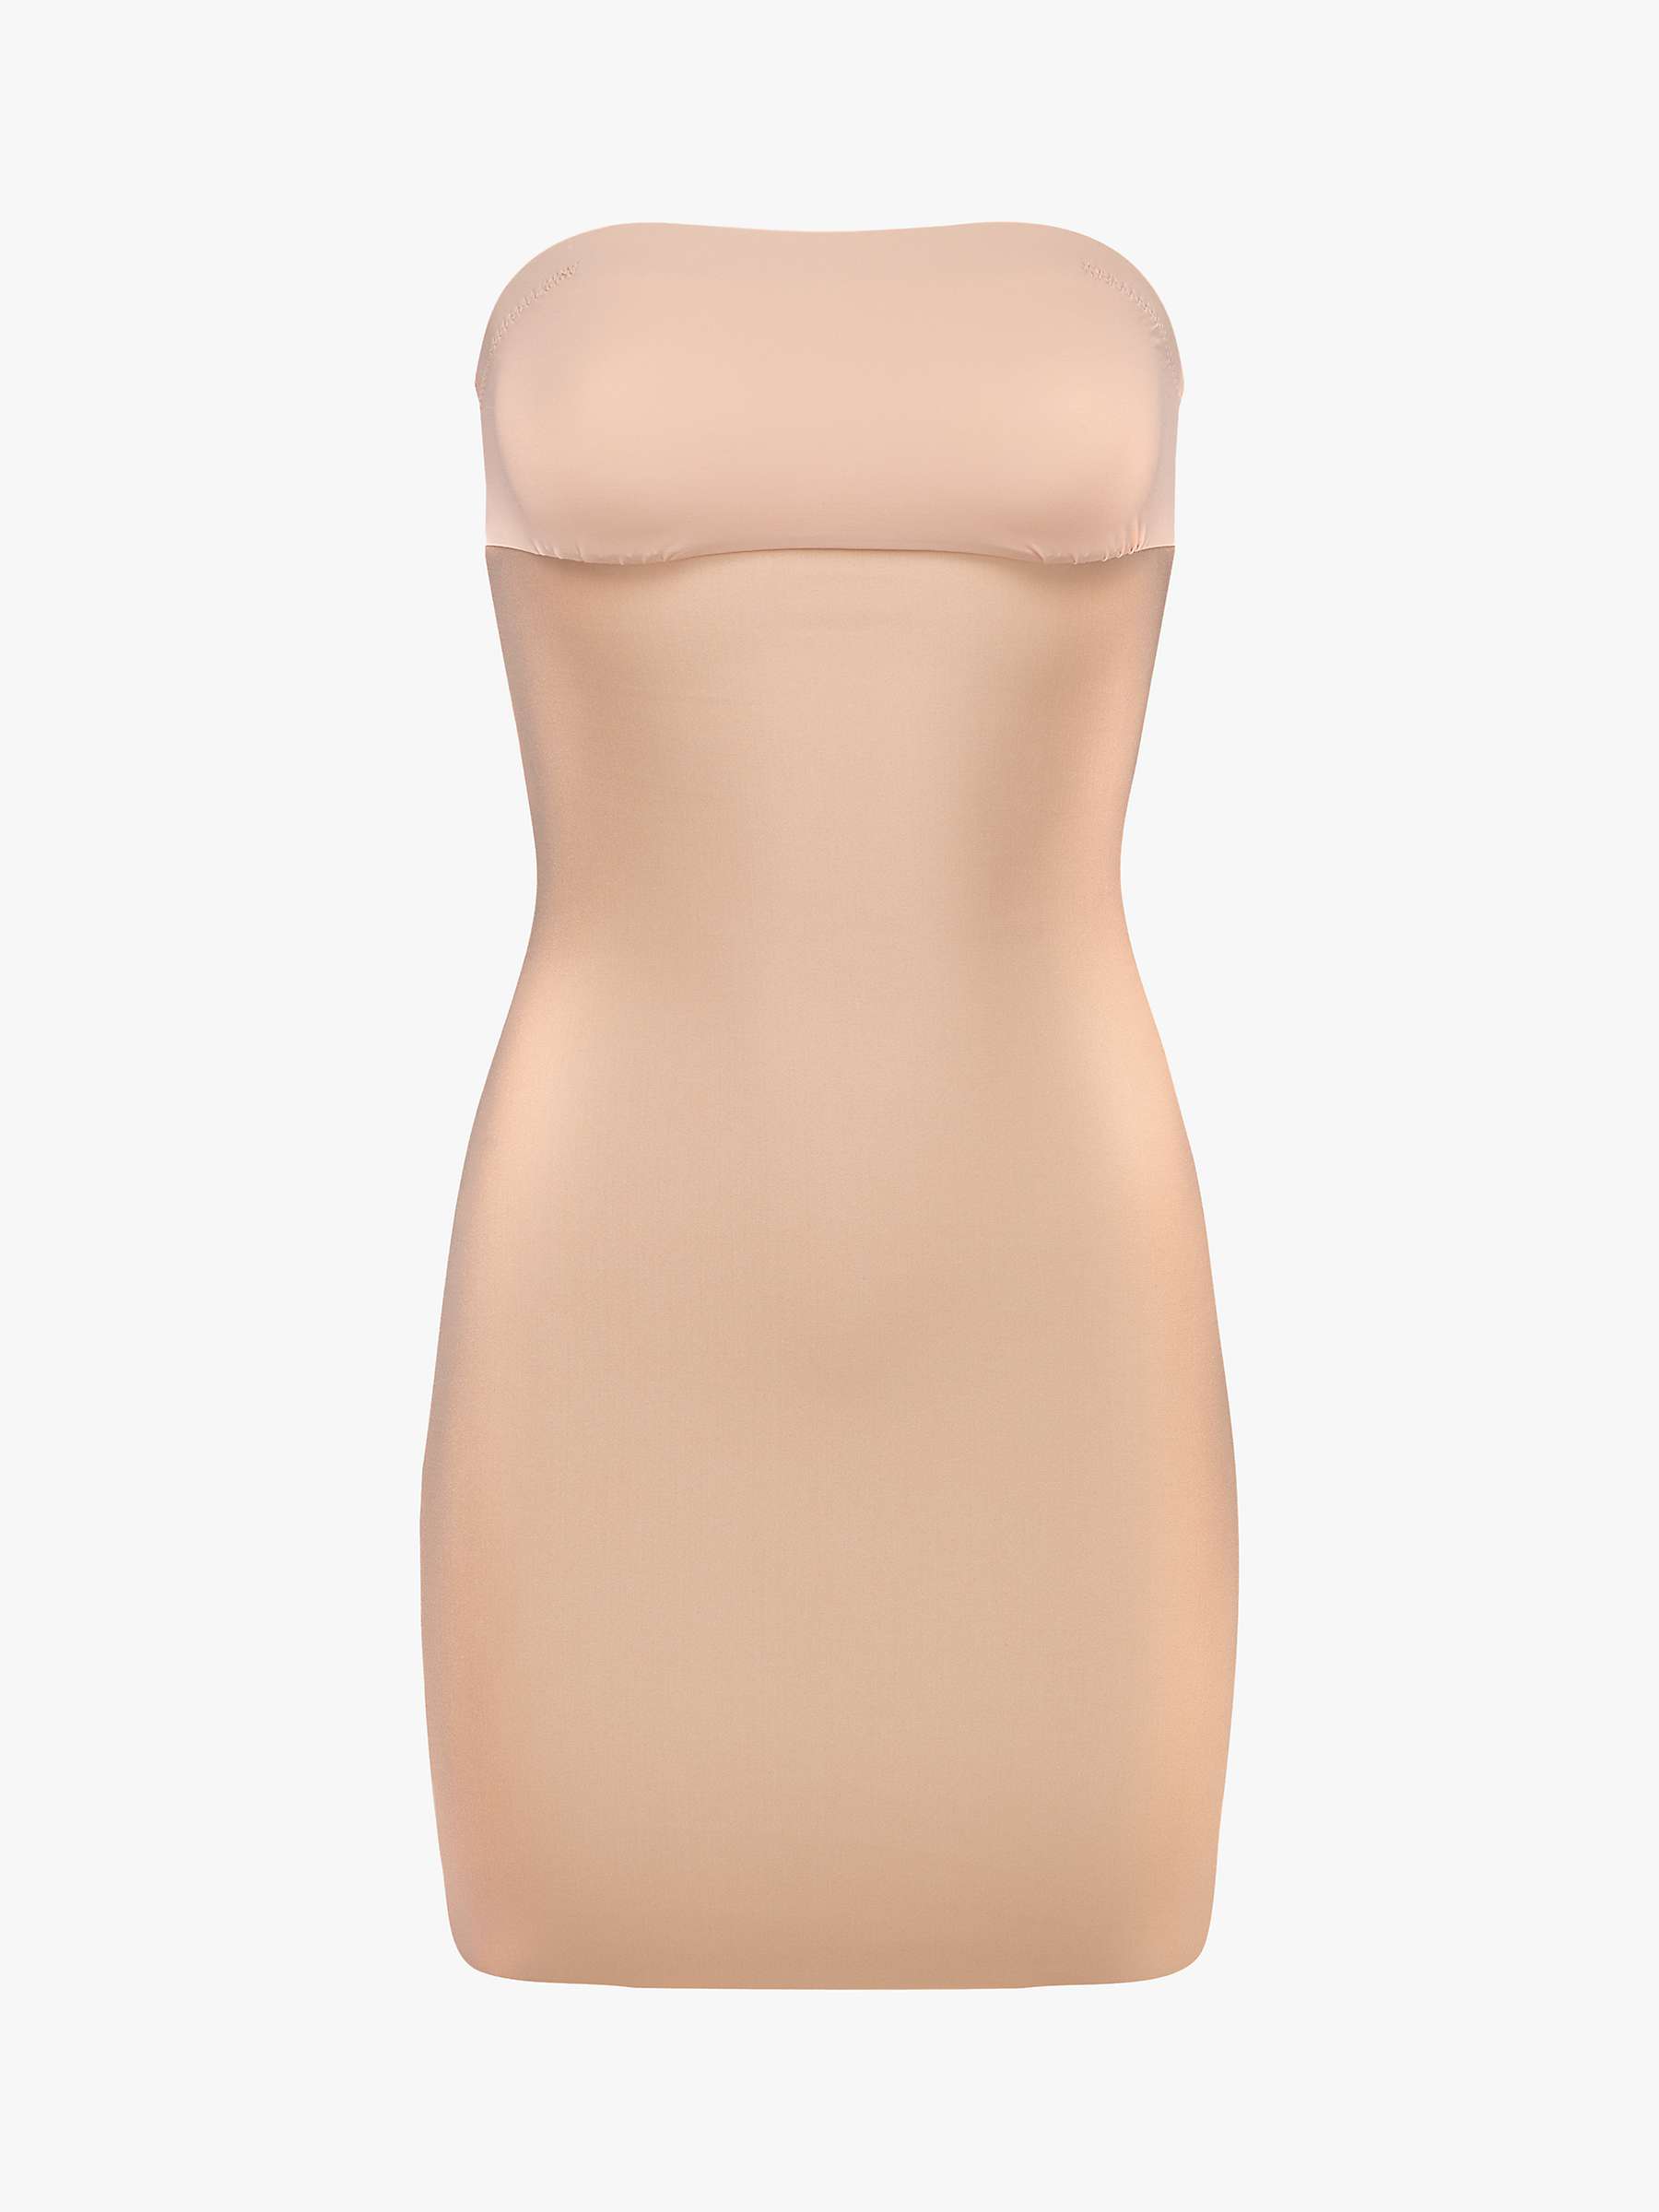 Buy Commando Seamless Two-Faced Tech Control Strapless Slip, Beige Online at johnlewis.com